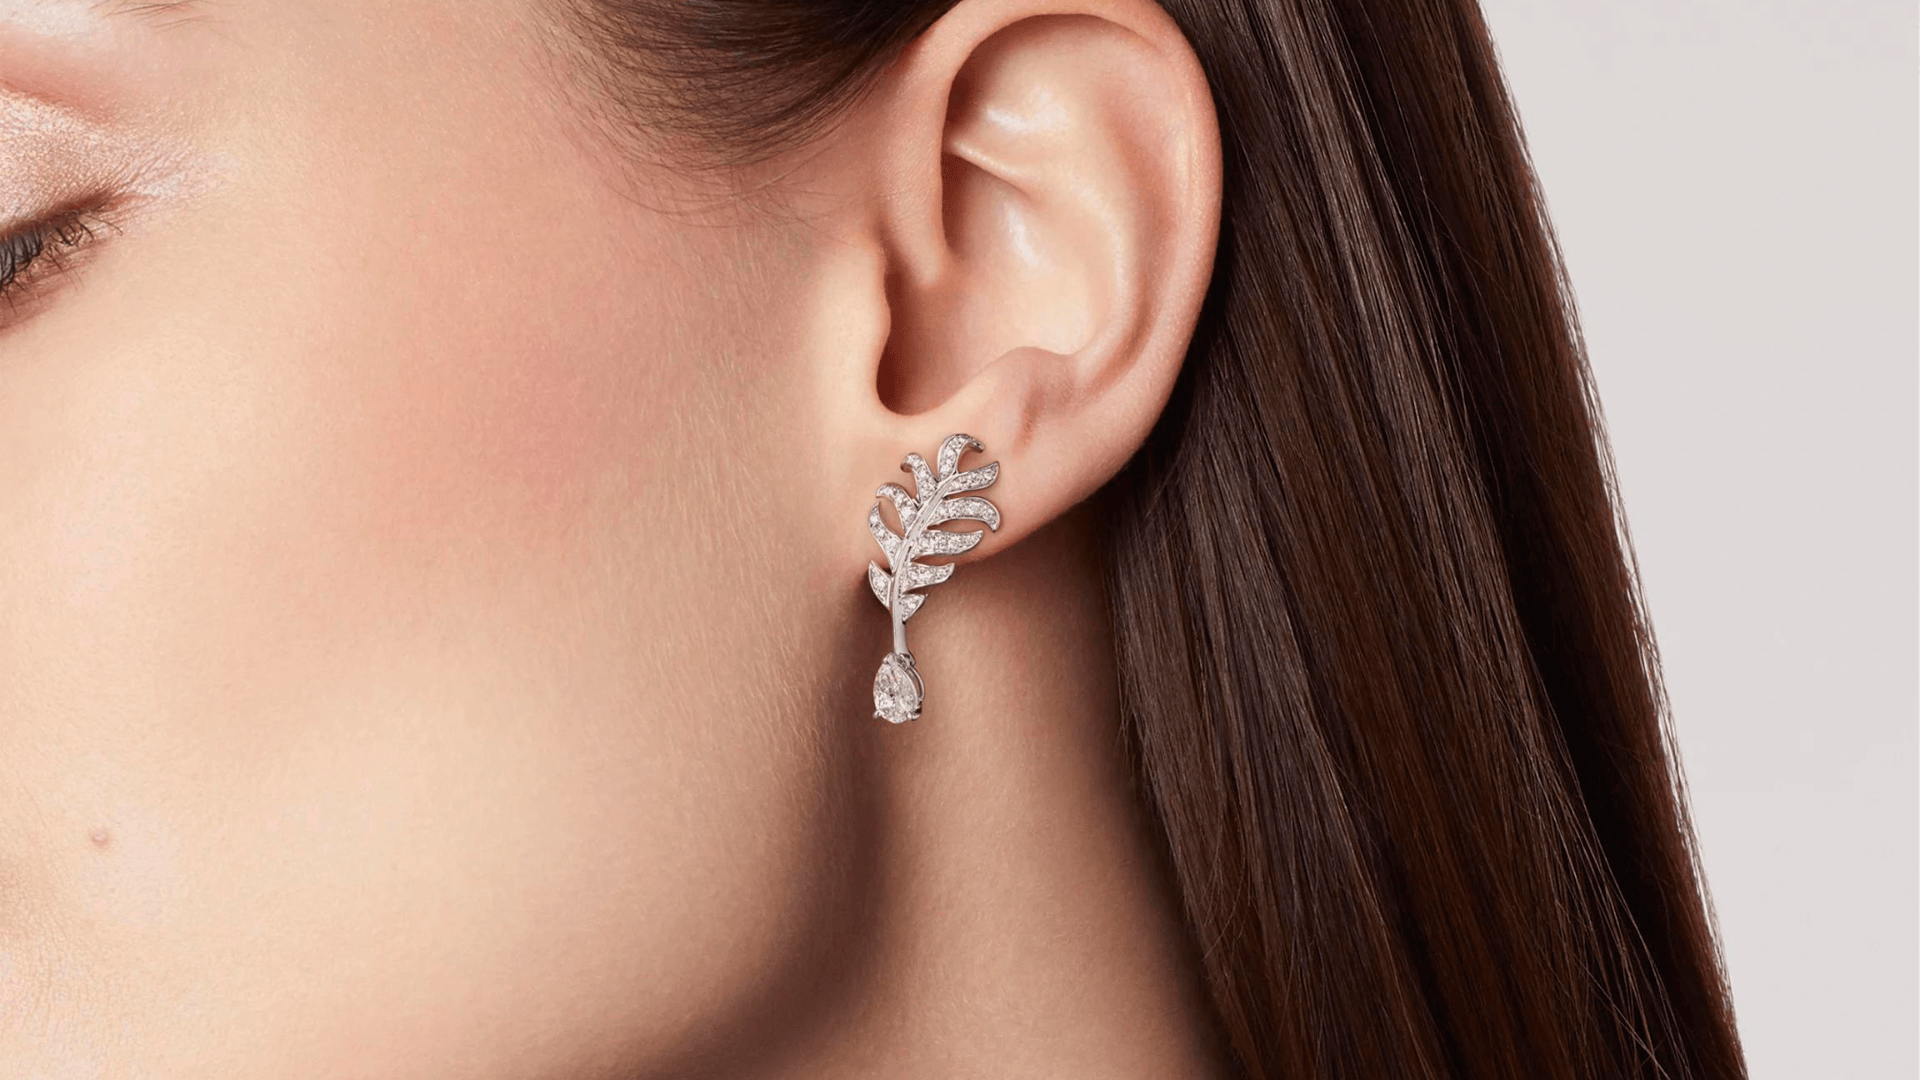 EARRINGS – Only Authentics